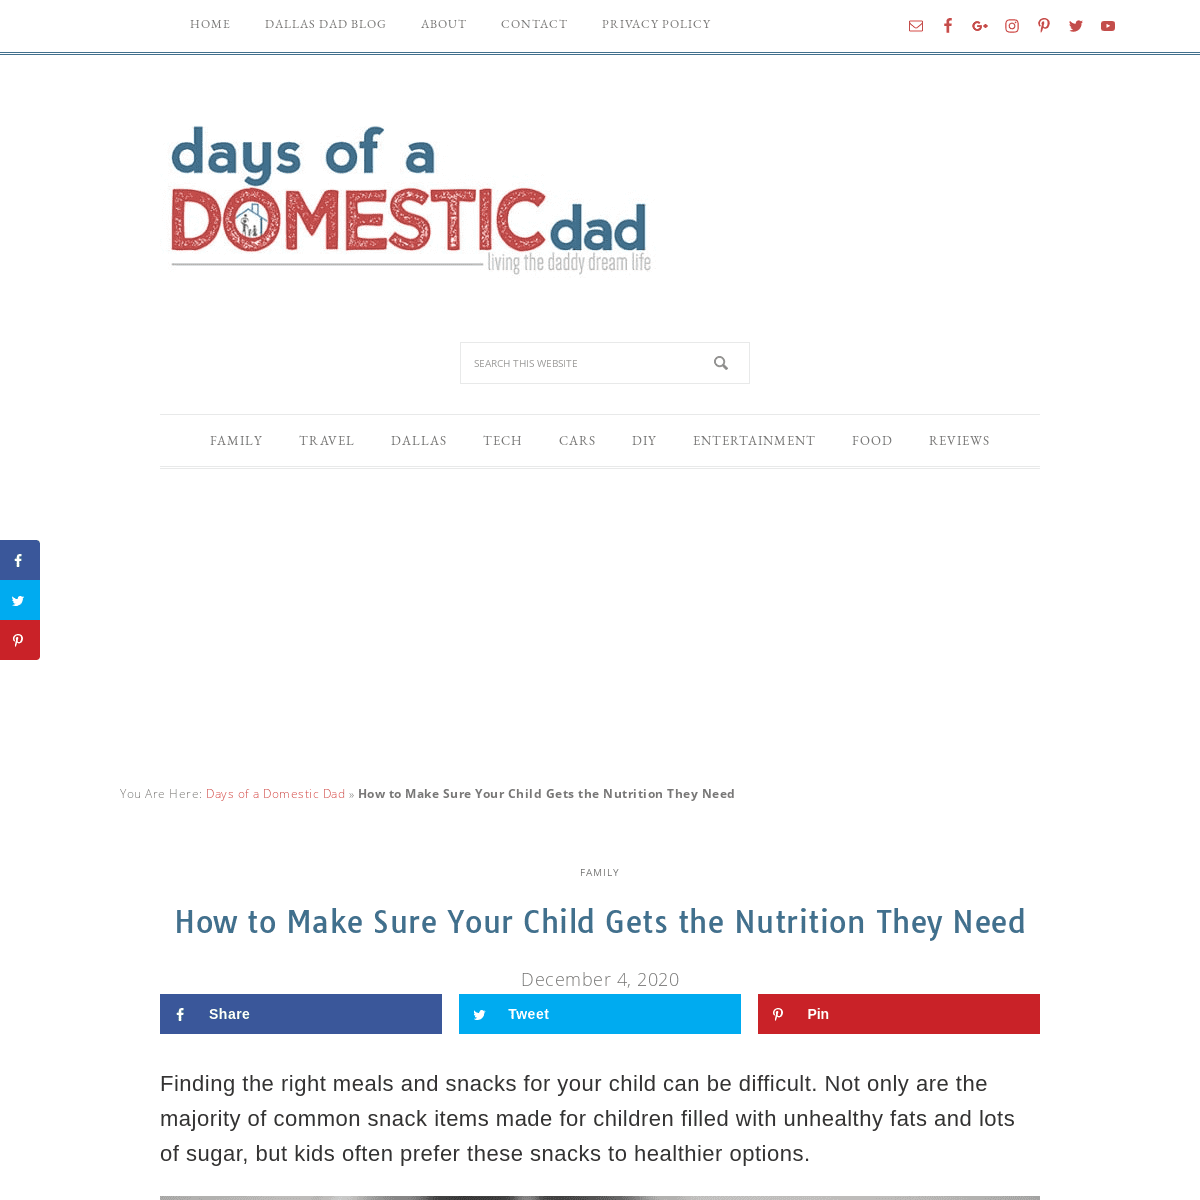 A complete backup of https://daysofadomesticdad.com/how-to-make-sure-your-child-gets-the-nutrition-they-need/